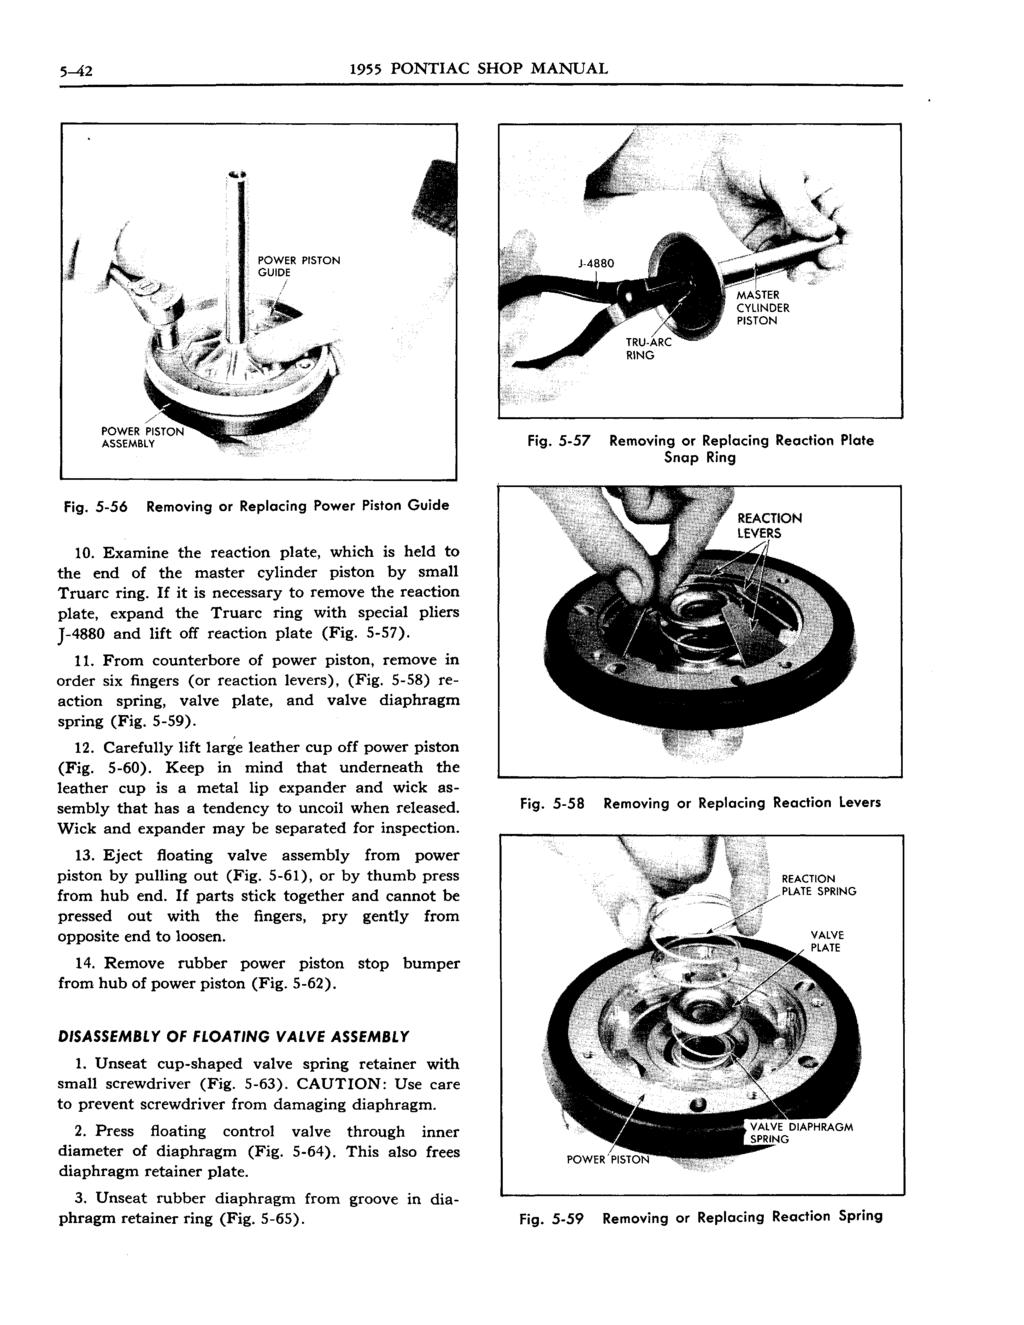 5-42 1955 PONTIAC SHOP MANUAL POWER PISTON GUIDE I Fig. 5-57 Removing or Replacing Reaction Plate Snap Ring Fig. 5-56 Removing or Replacing Power Piston Guide 10.